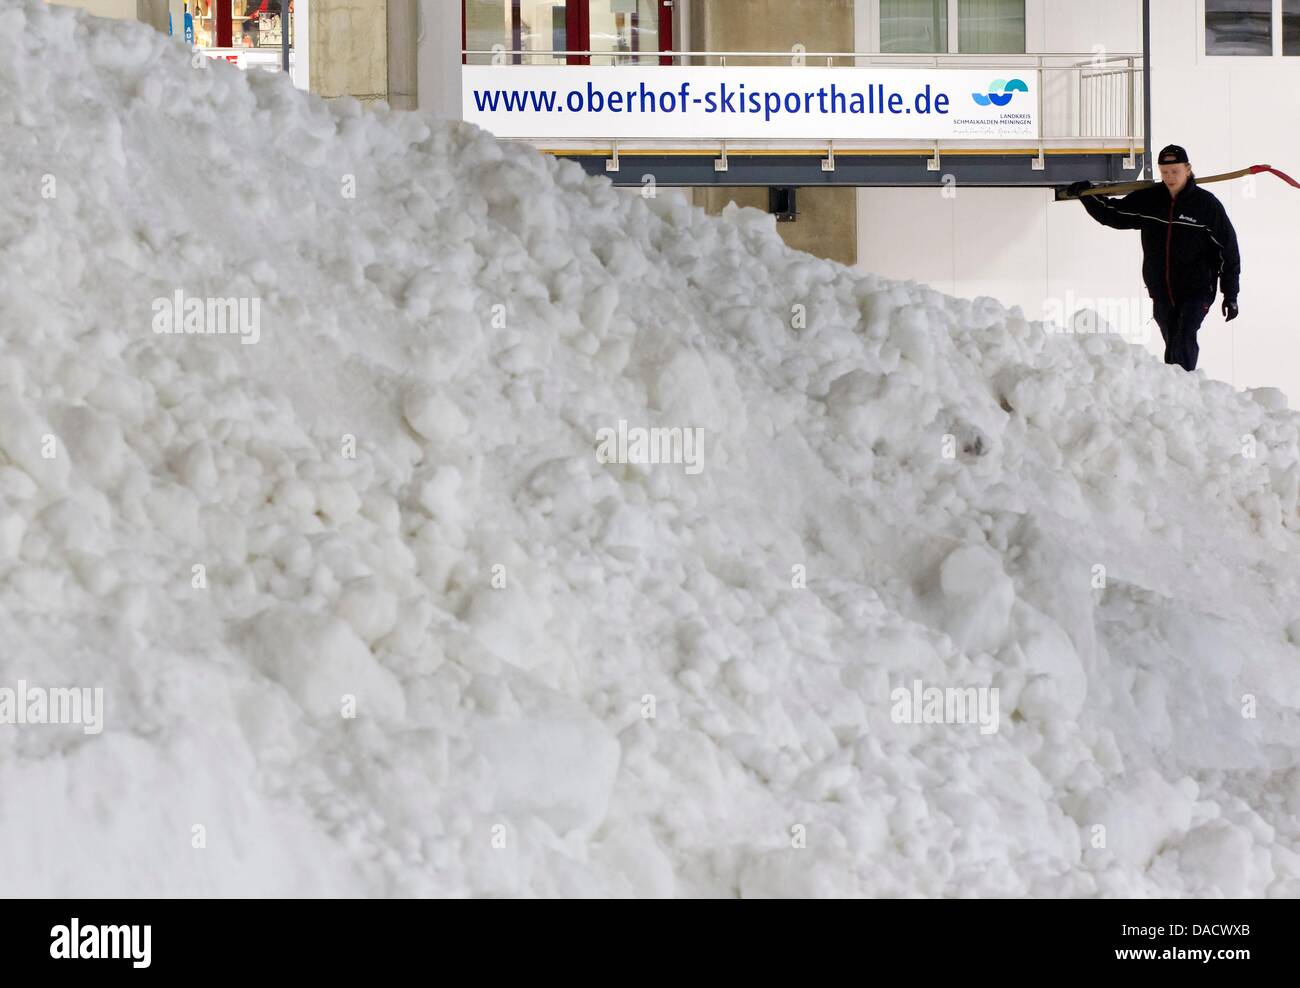 A technician works next to 1000 cubic meters of crushed ice at a ski sport venue in Oberhof, Germany, 19 December 2011. The ice is supposed to be used for the Tour de Ski on 29 and 30 December 2011 an dthe Biathlon World Cup on 4 - 8 January 2012 in Oberhof. Photo: MICHAEL REICHEL Stock Photo